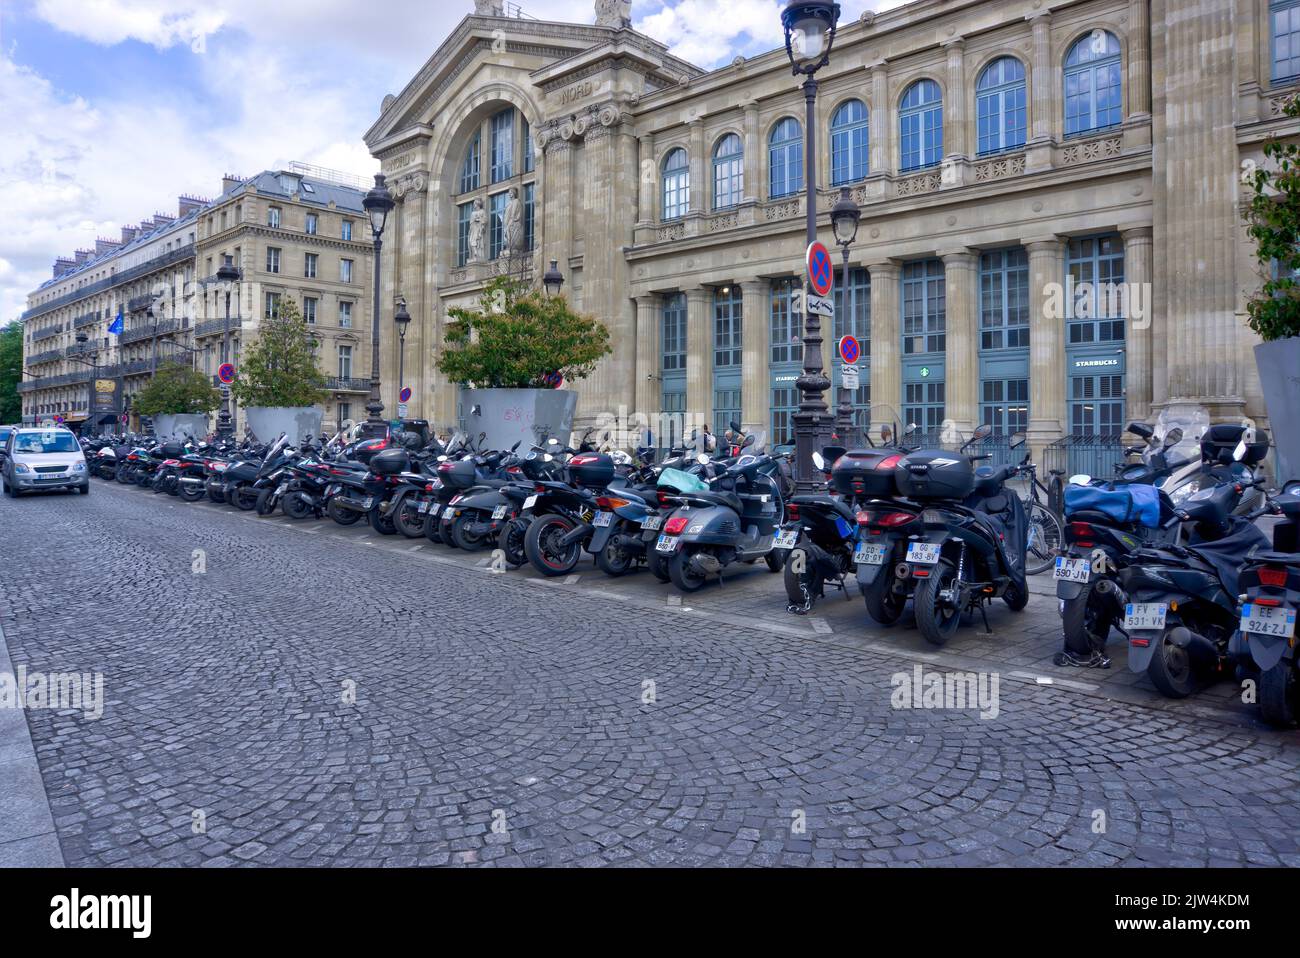 Paris, France - May 30, 2022: Exterior of Gare du Nord rail station with large row of parked motorcycles and scooters in foreground Stock Photo